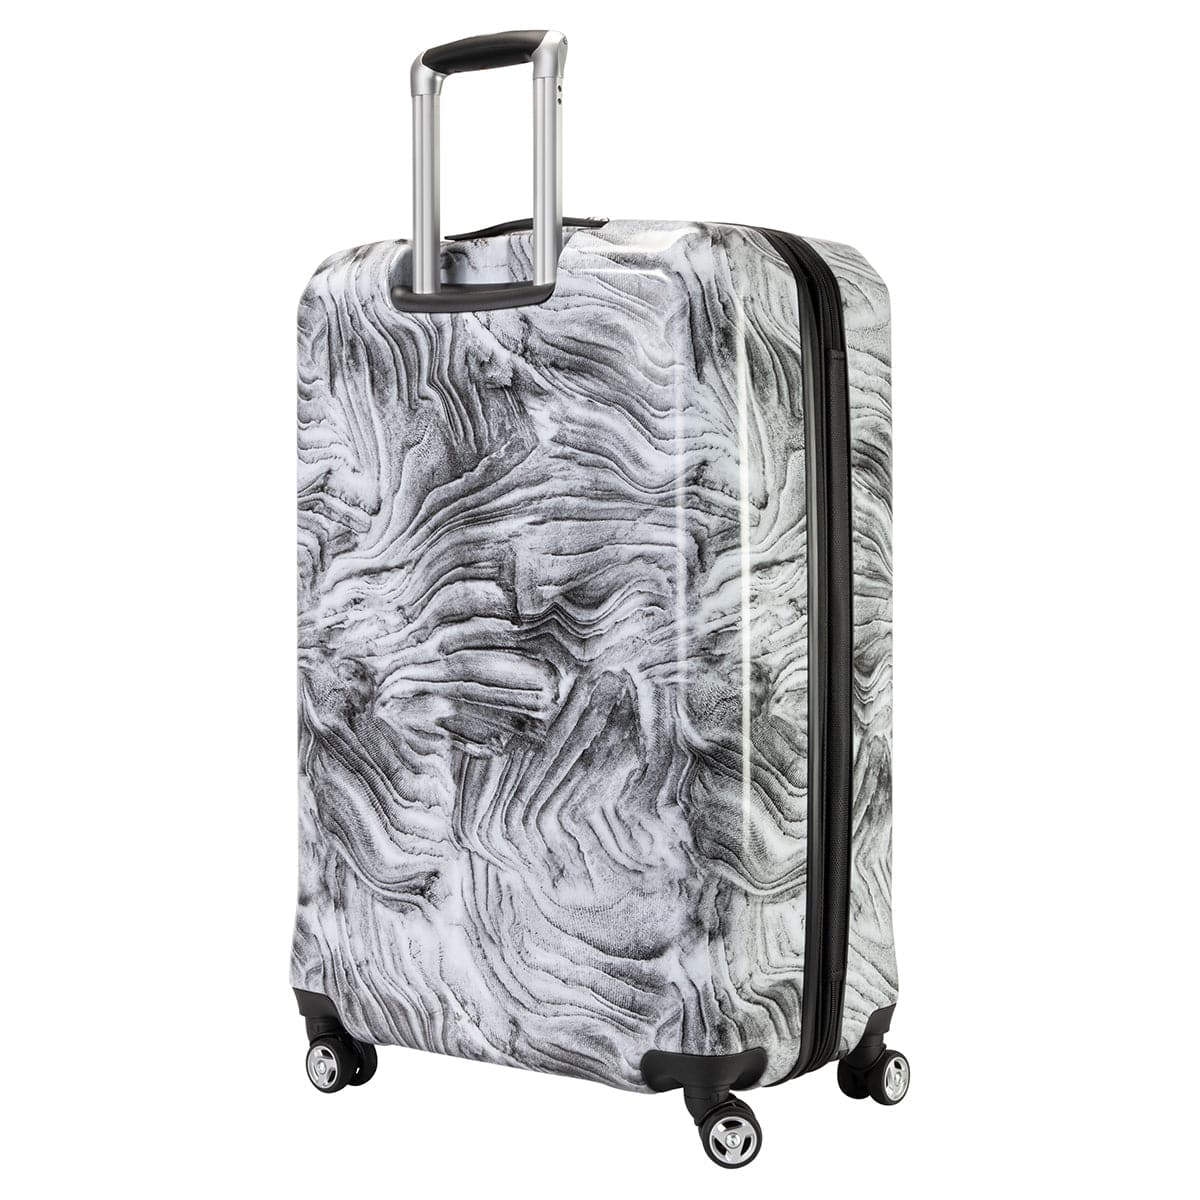 Skyway Nimbus 4.0 Hardside Expandable 28" Spinner Check-In Luggage